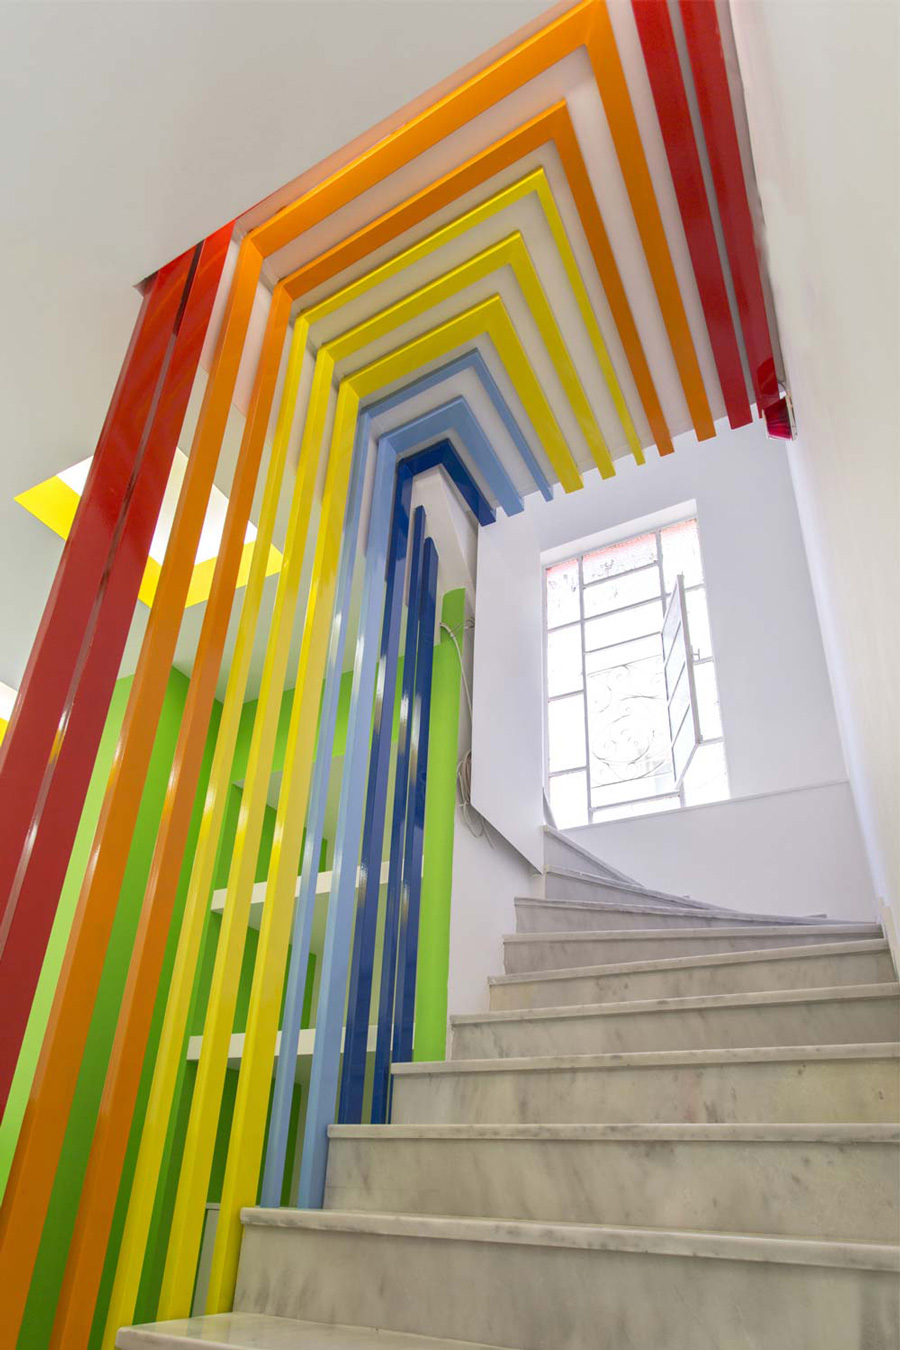 Custom-made stair railing becomes the colorful background for the reception